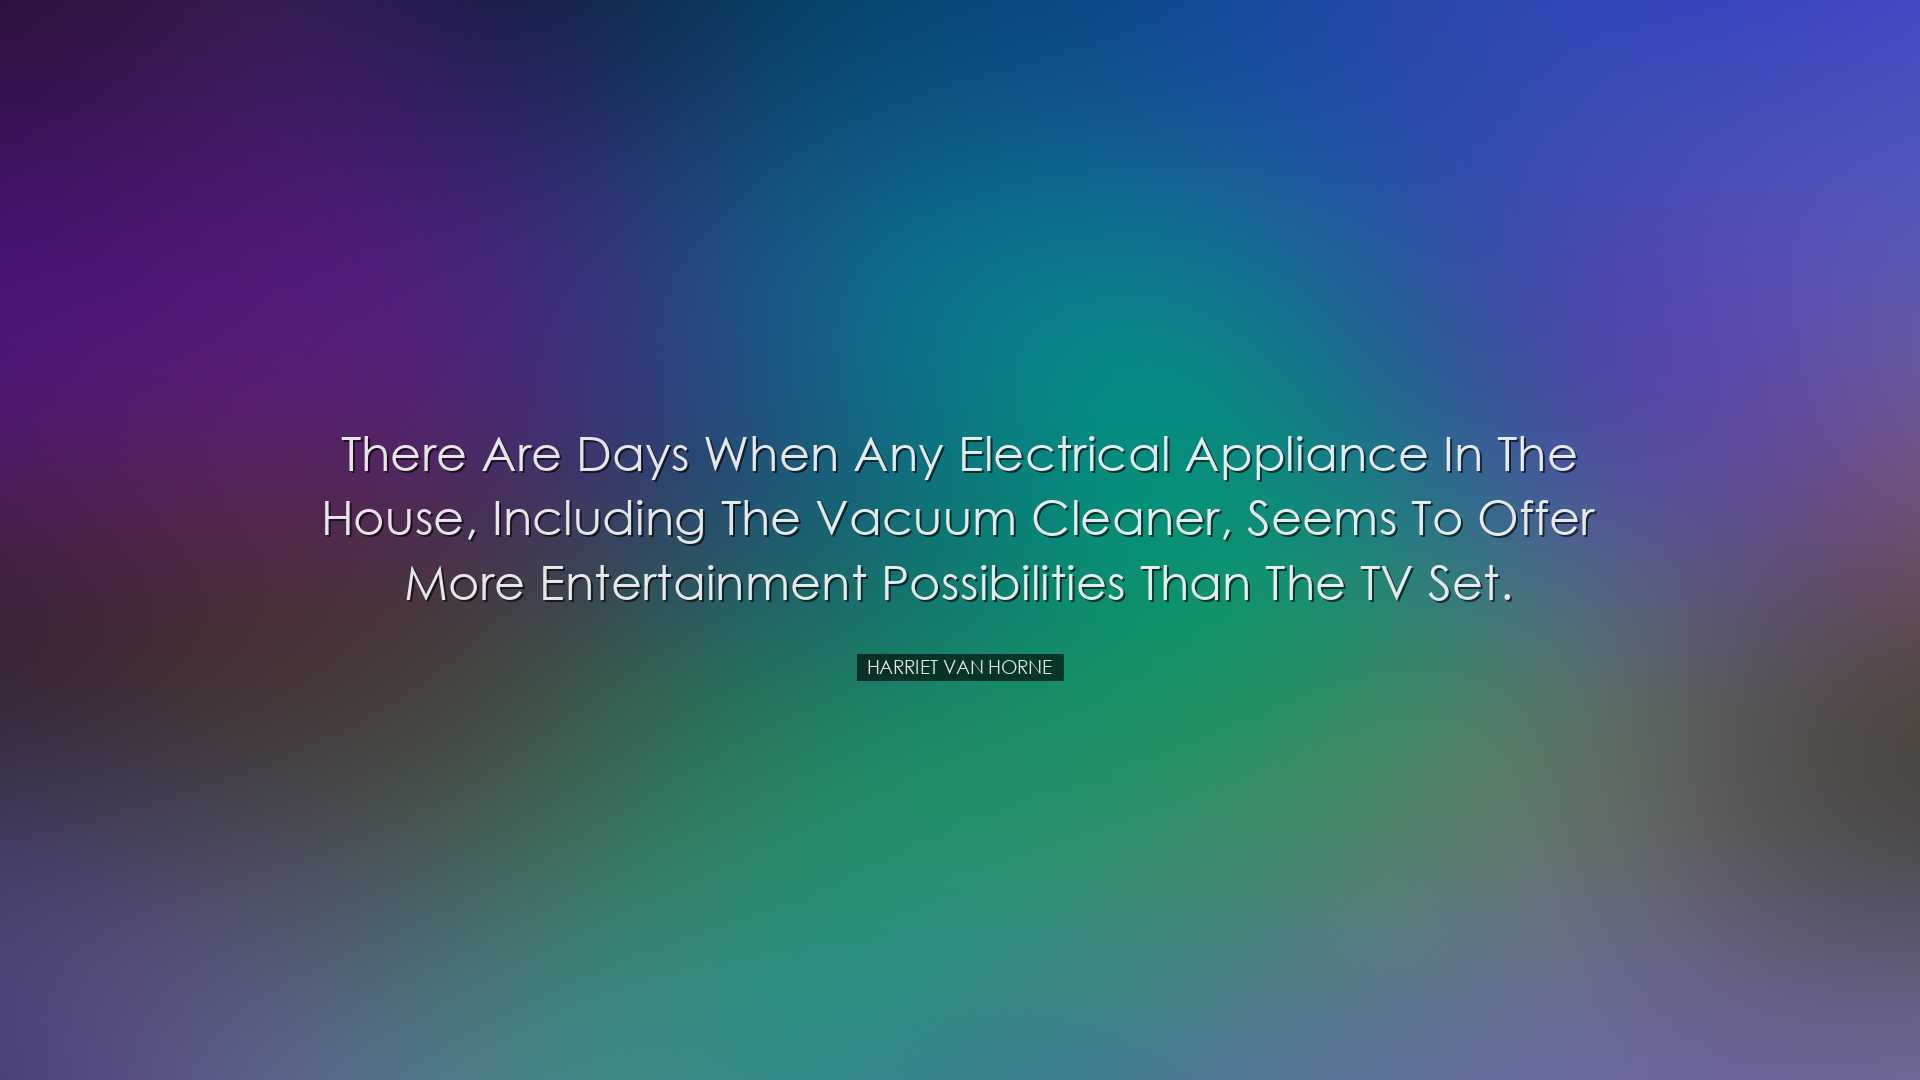 There are days when any electrical appliance in the house, includi